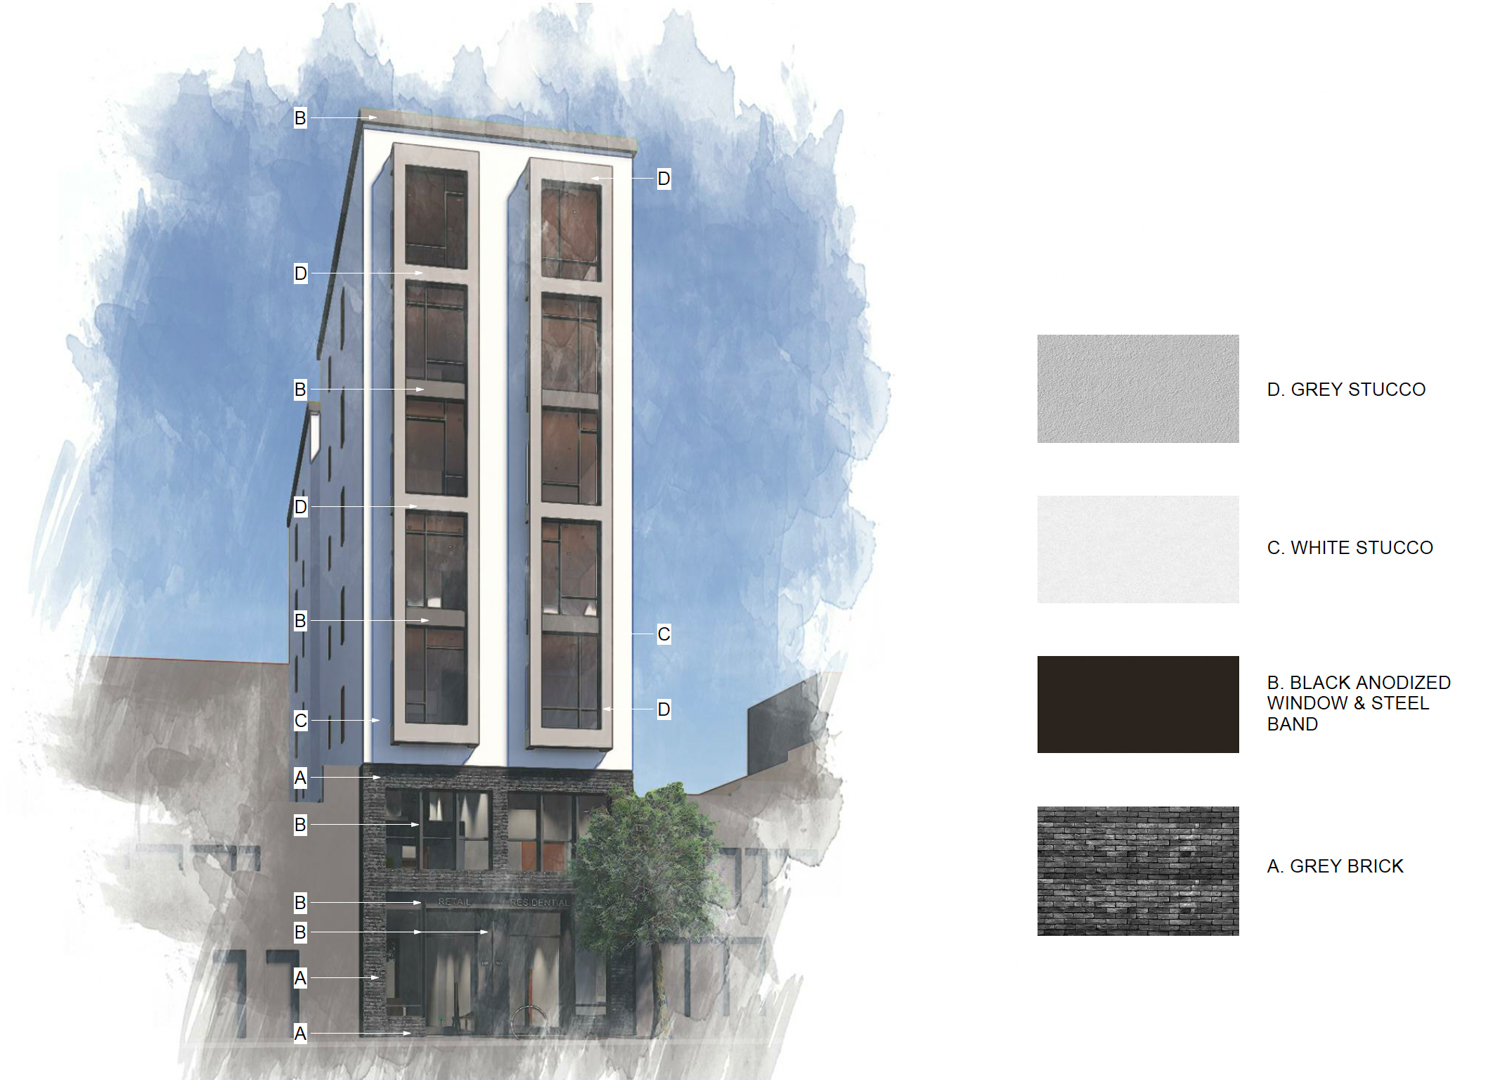 159 Fell Street material board, rendering by Winder Gibson Architects